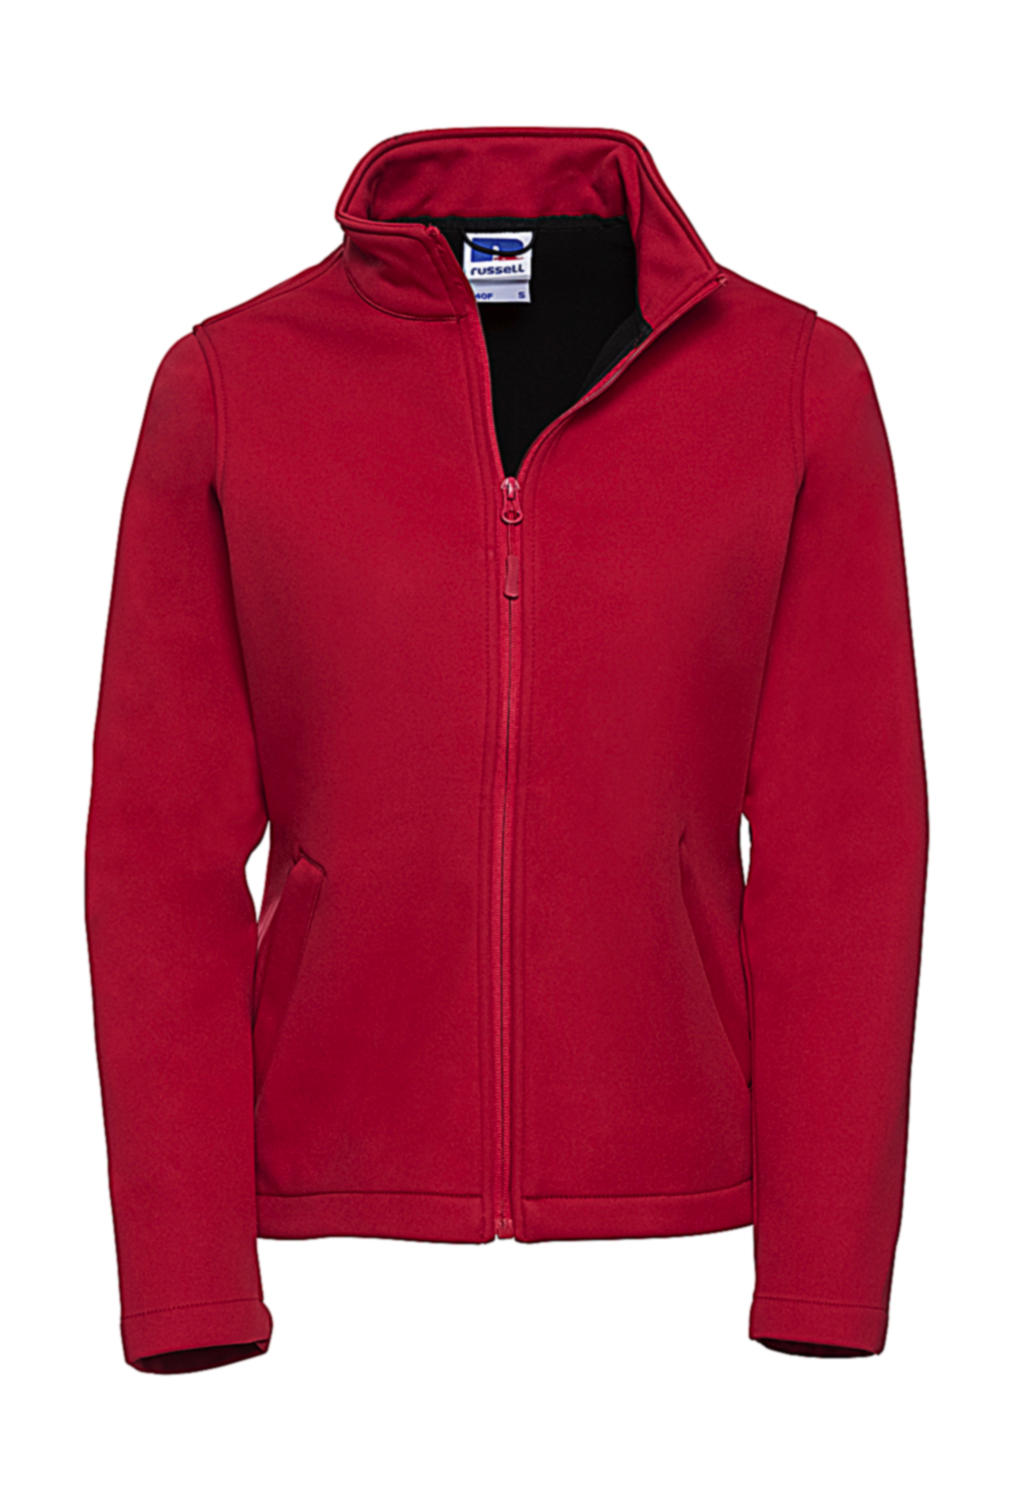  Ladies Smart Softshell Jacket in Farbe Classic Red